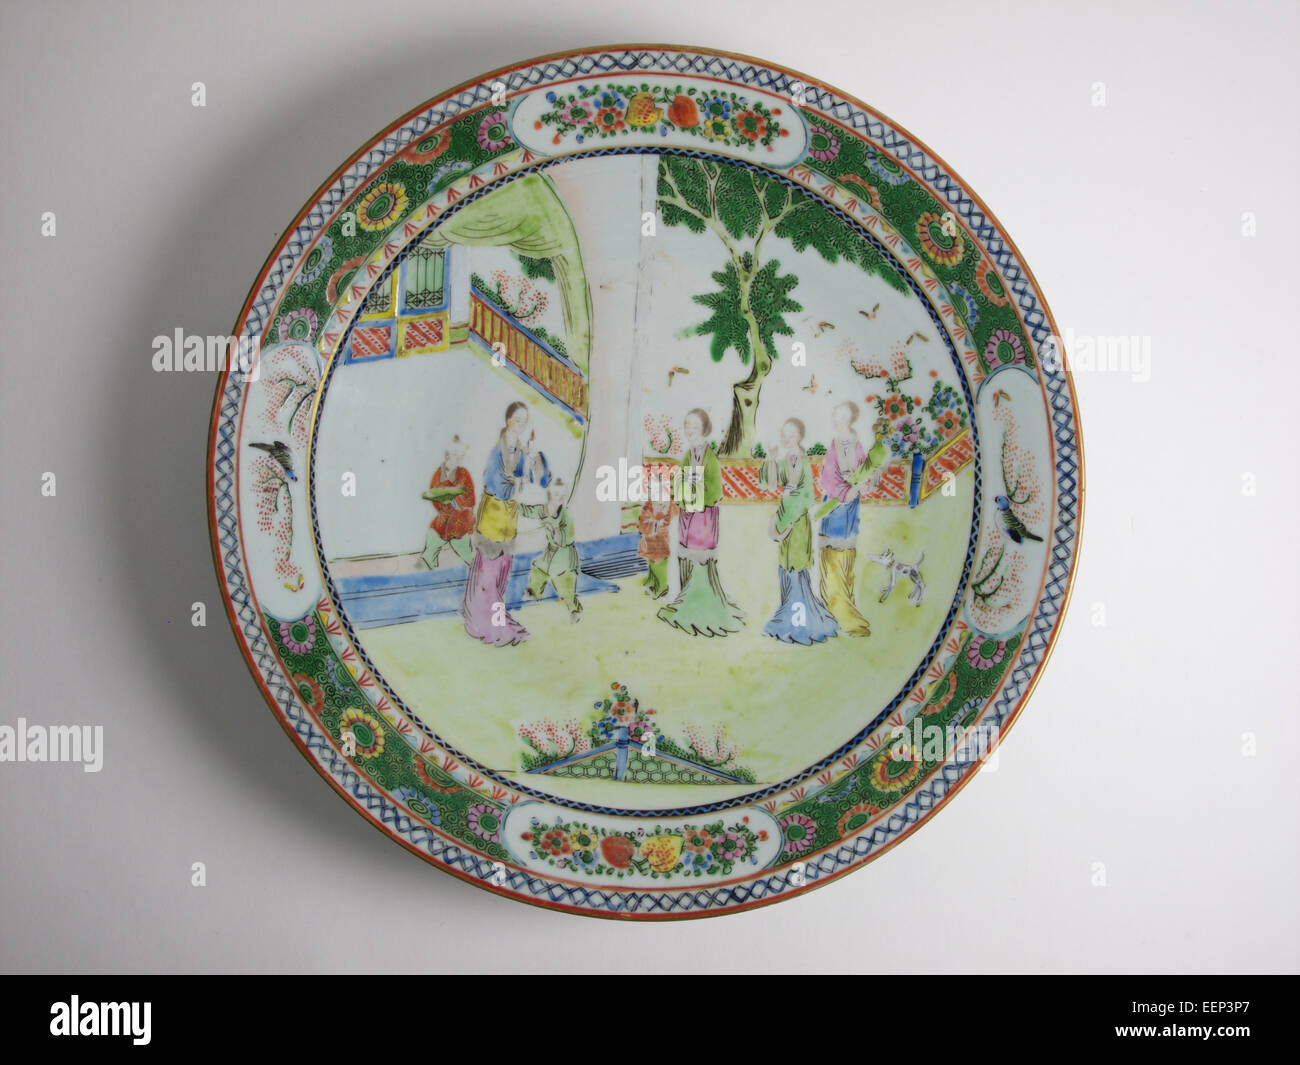 Antique Chinese famille verte porcelain dish, painted with figures within a garden. The dish measures 30.5 cm in diameter. Stock Photo